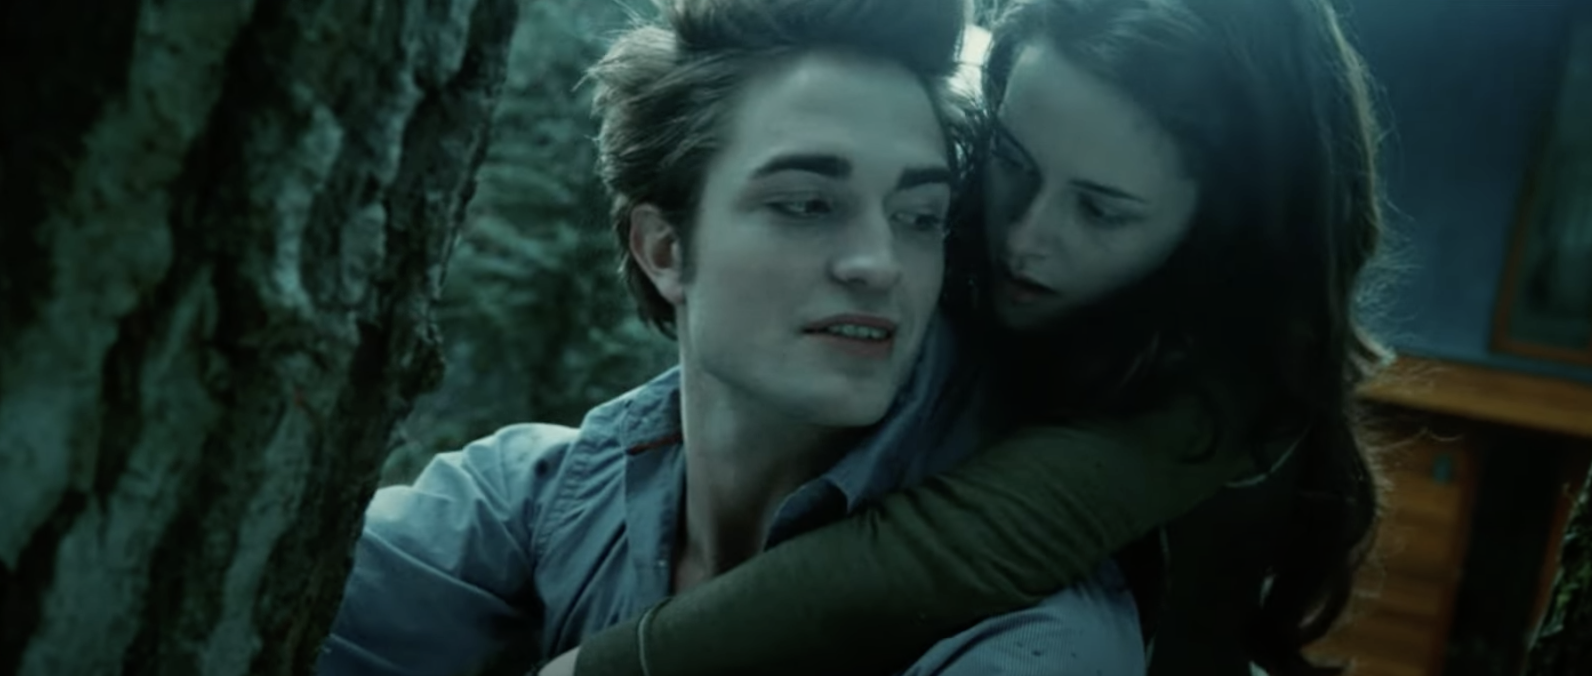 Bella and Edward on a tree